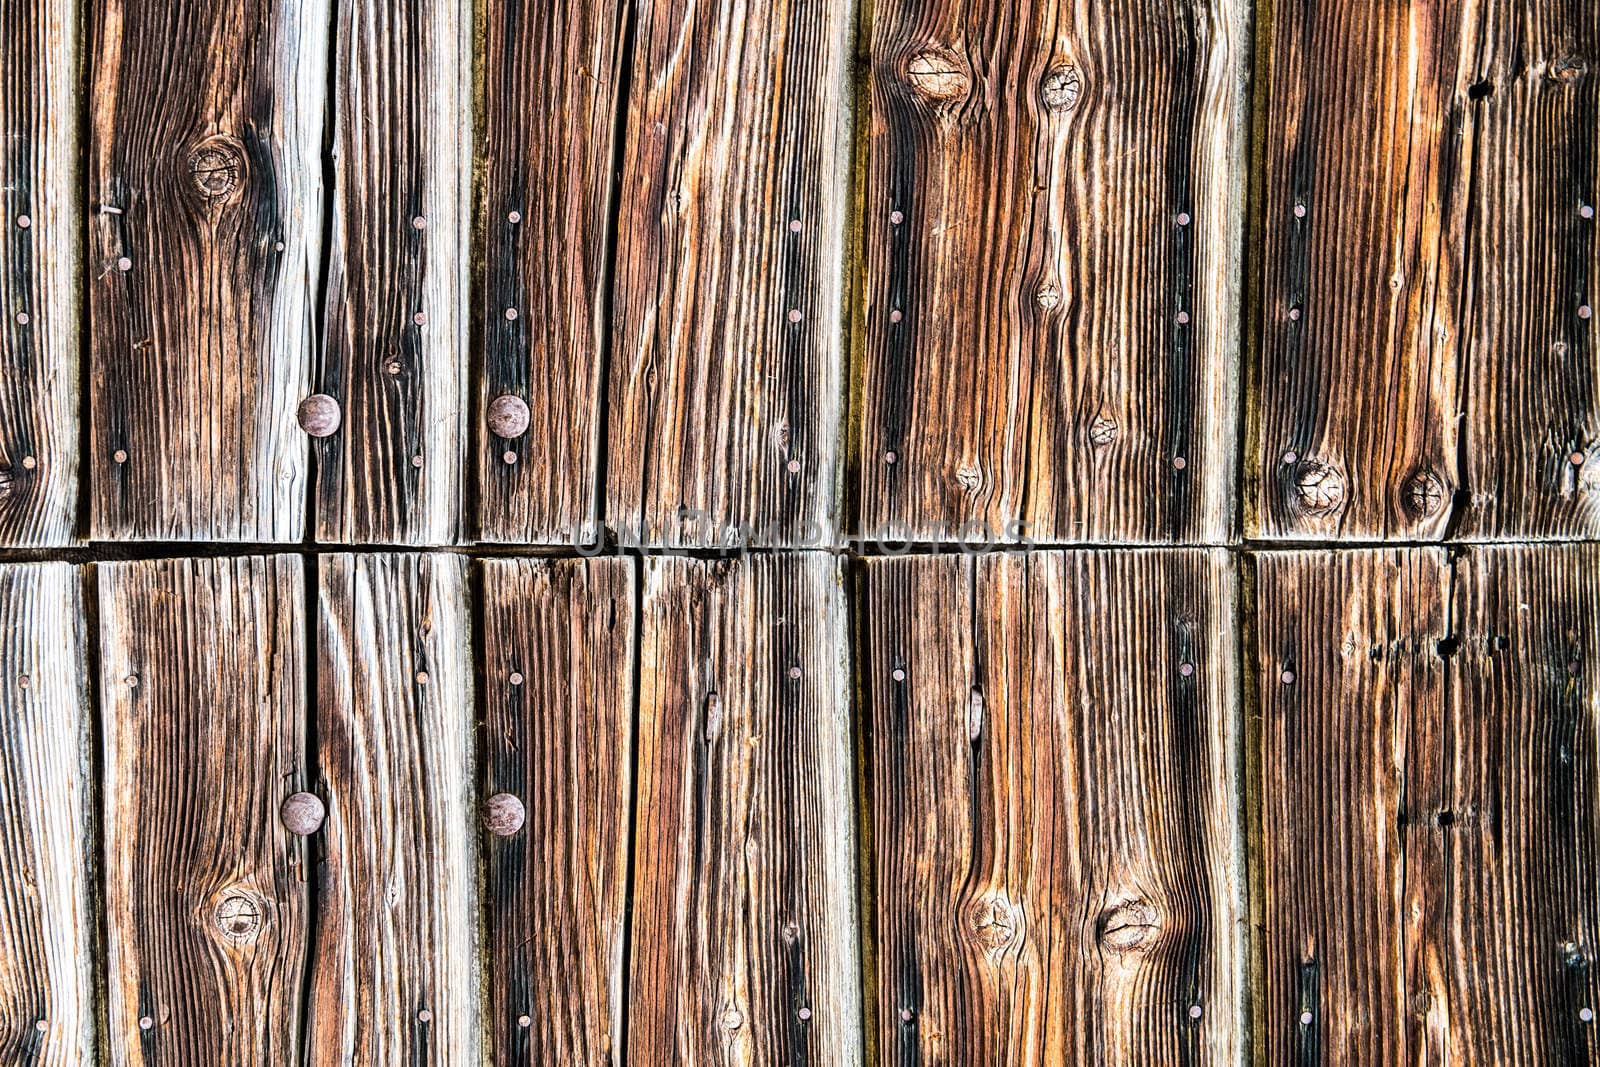 Wooden wall of an old barn. by Isaac74